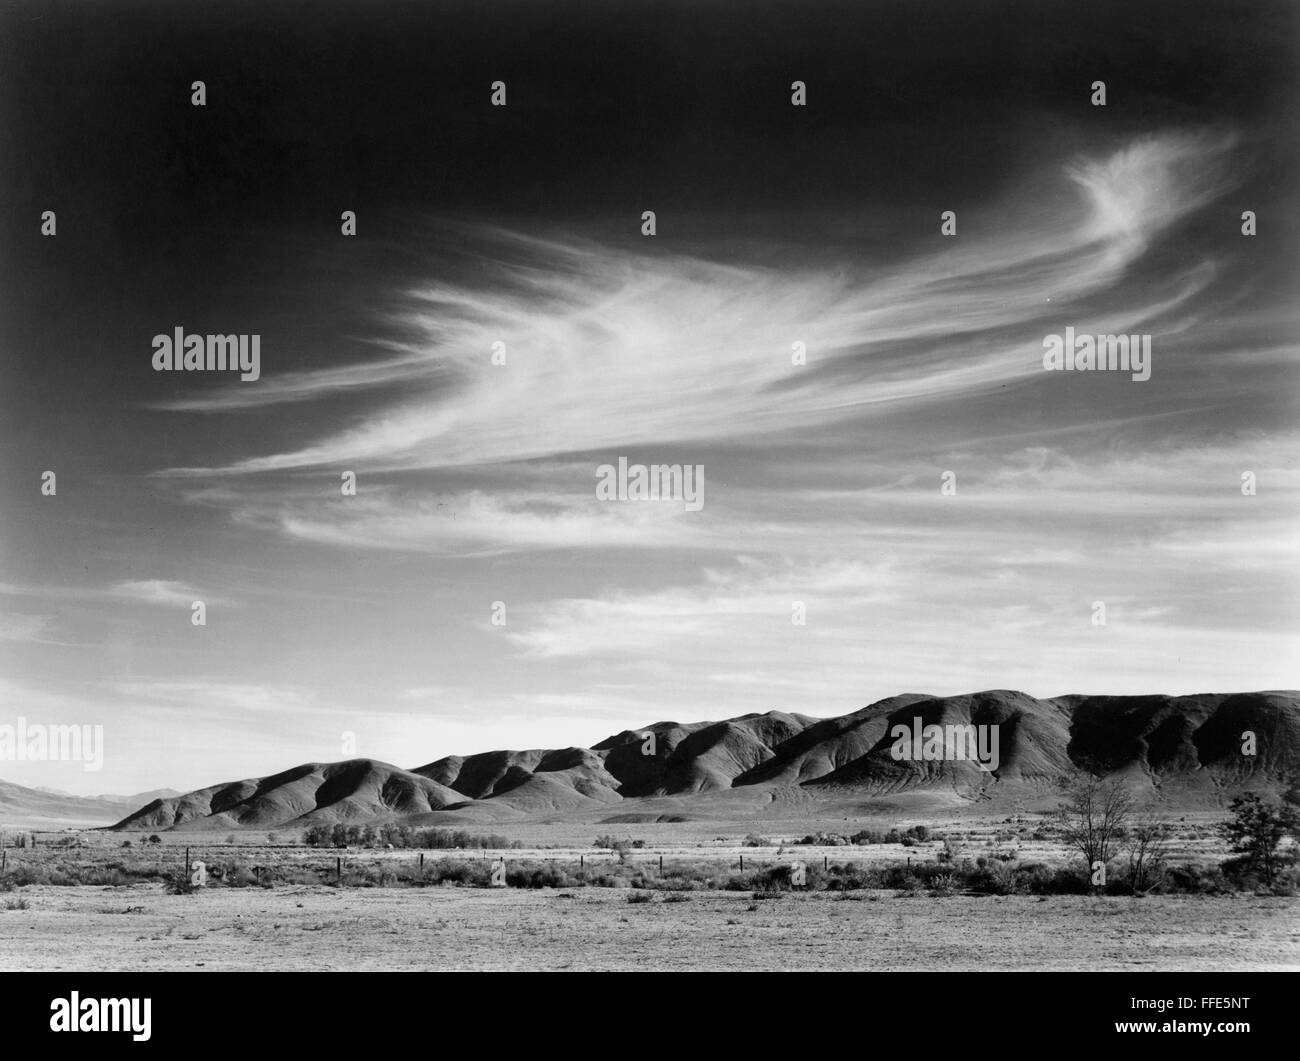 CALIFORNIA: OWENS VALLEY. /nView south from the Manzanar Relocation Center for Japanese-Americans to the Alabama Hills at Owens Valley, California. Photograph by Ansel Adams, 1943. Stock Photo